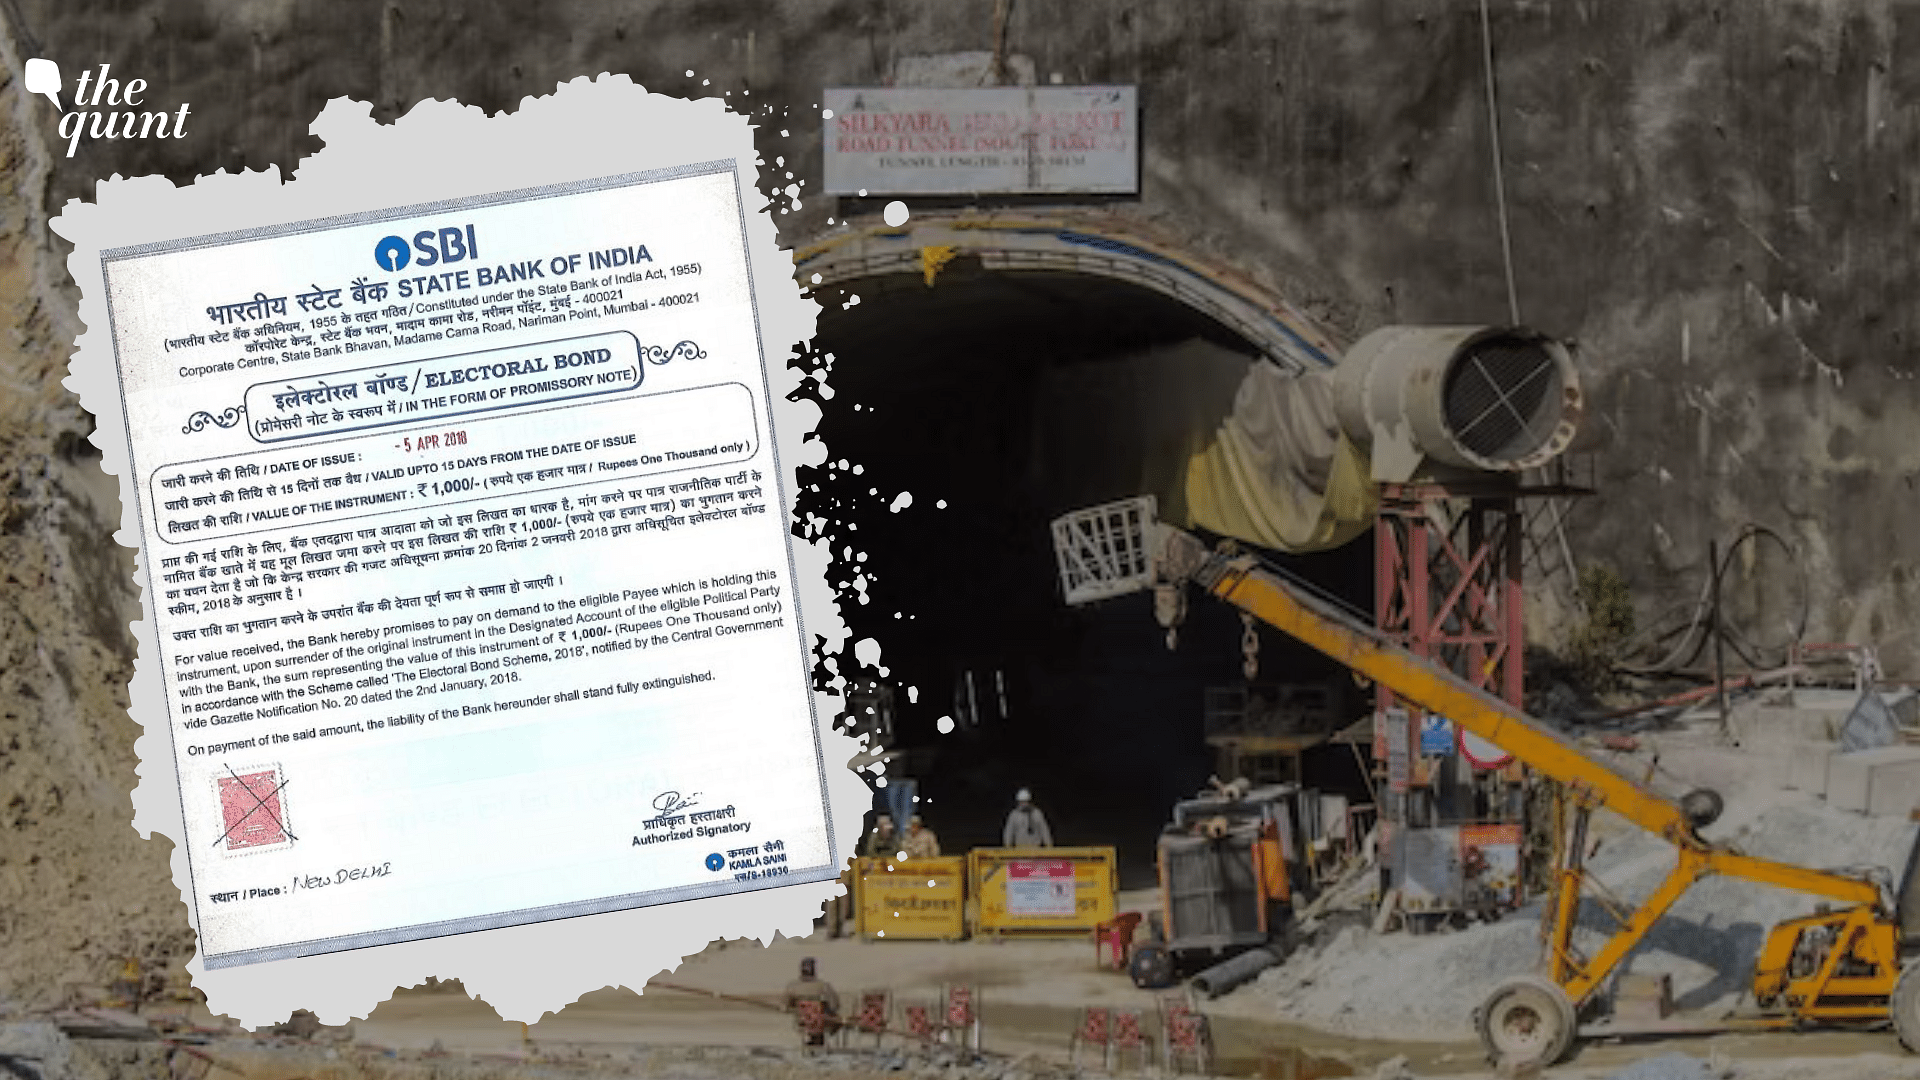 <div class="paragraphs"><p>Navayuga Engineering Co which was building the collapsed Uttarkashi tunnel, bought Rs 55 crore electoral bonds, data reveals</p></div>